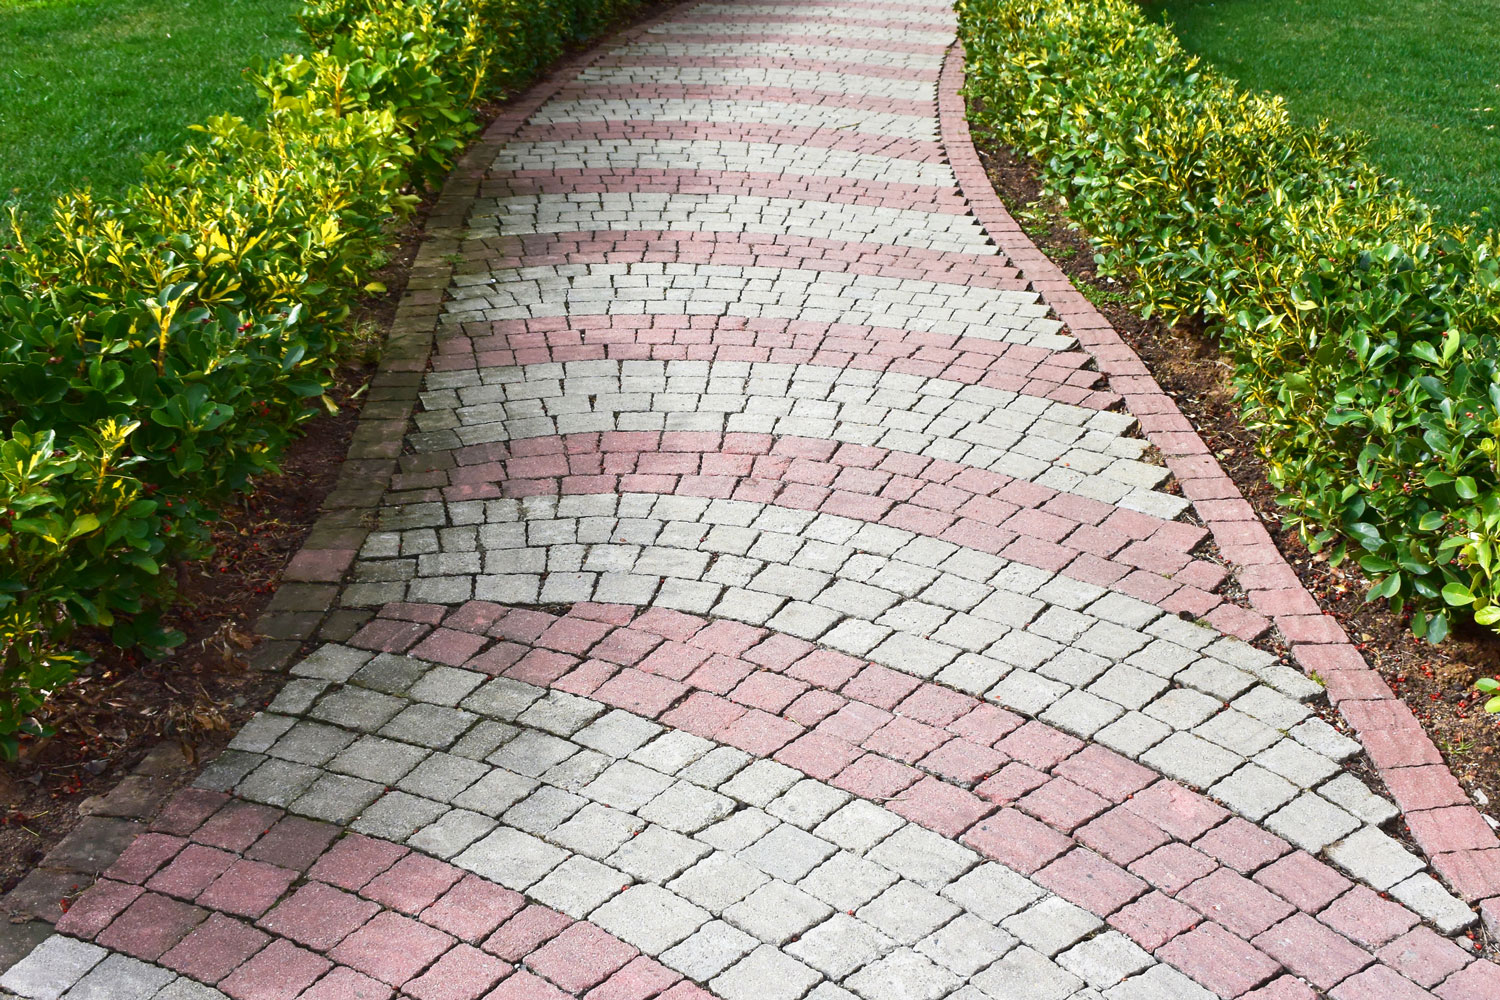 Patterned walkway pavers with flowers decorated on the sides